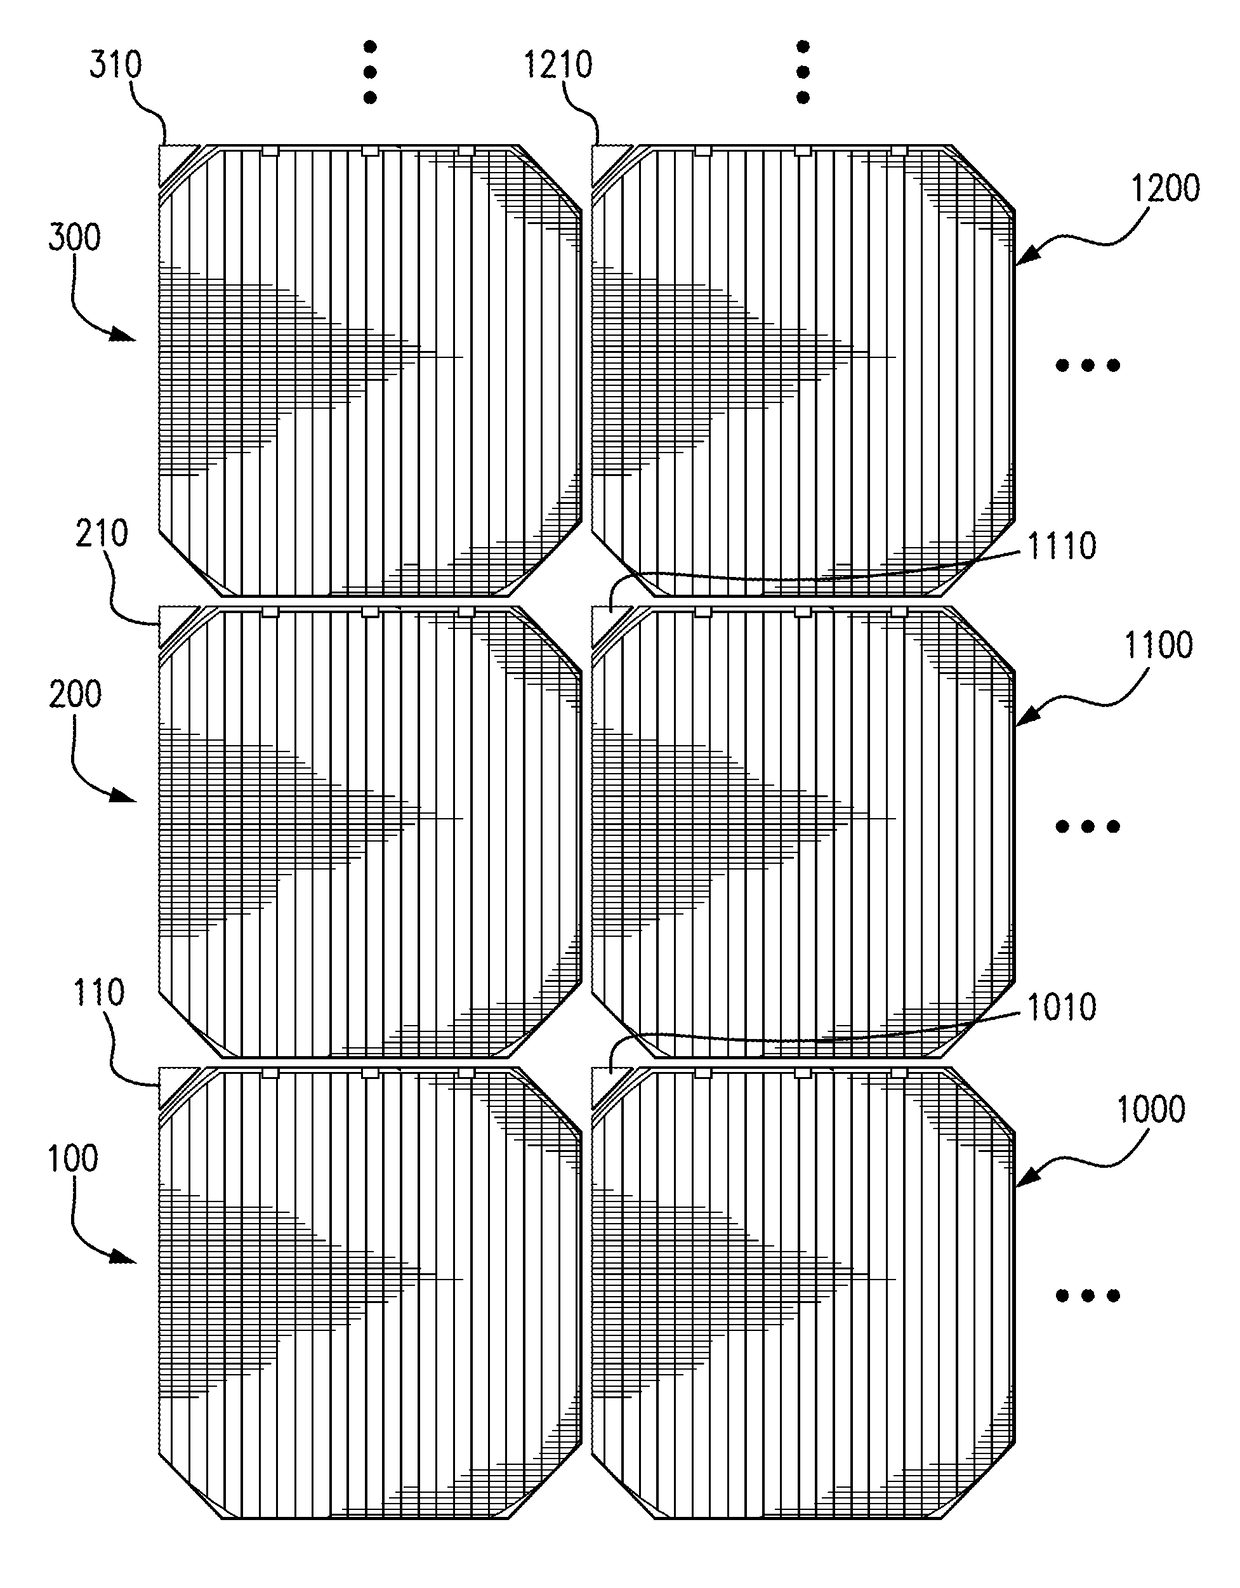 Space solar cell panel with blocking diodes